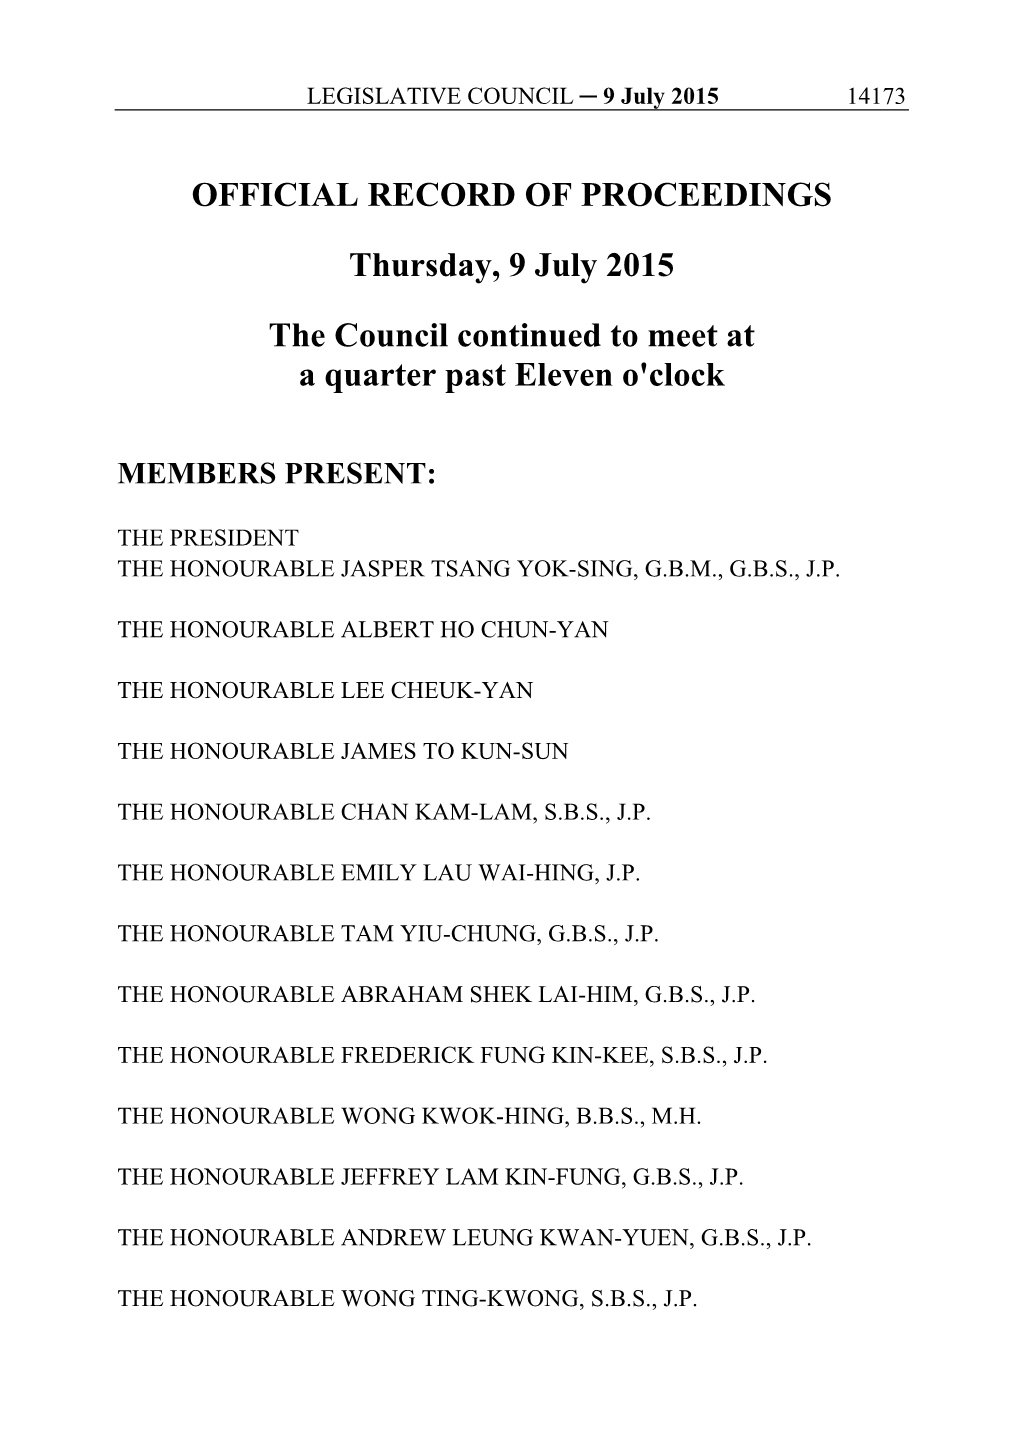 OFFICIAL RECORD of PROCEEDINGS Thursday, 9 July